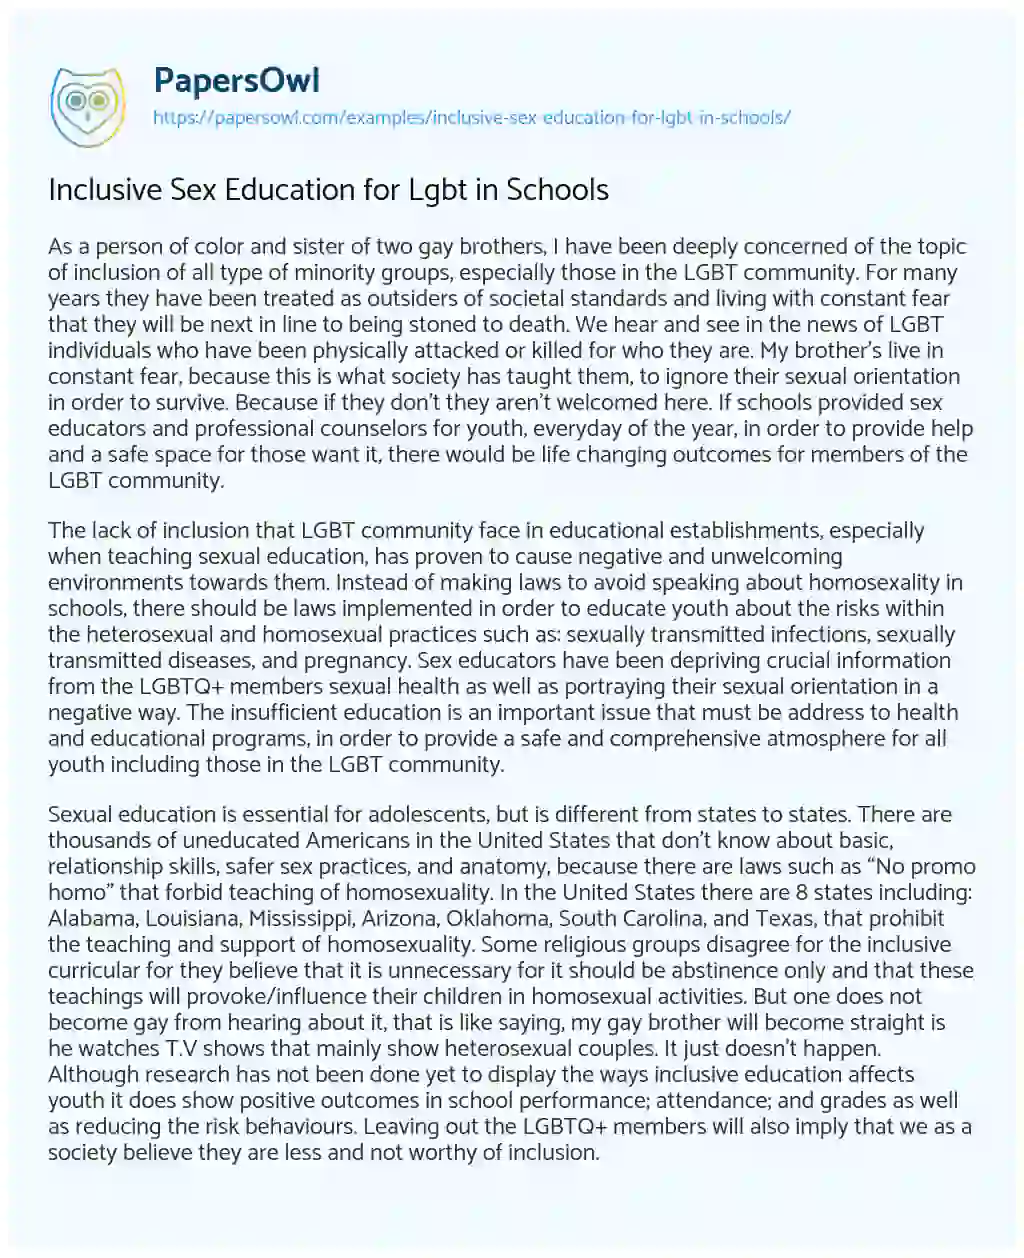 Essay on Inclusive Sex Education for Lgbt in Schools